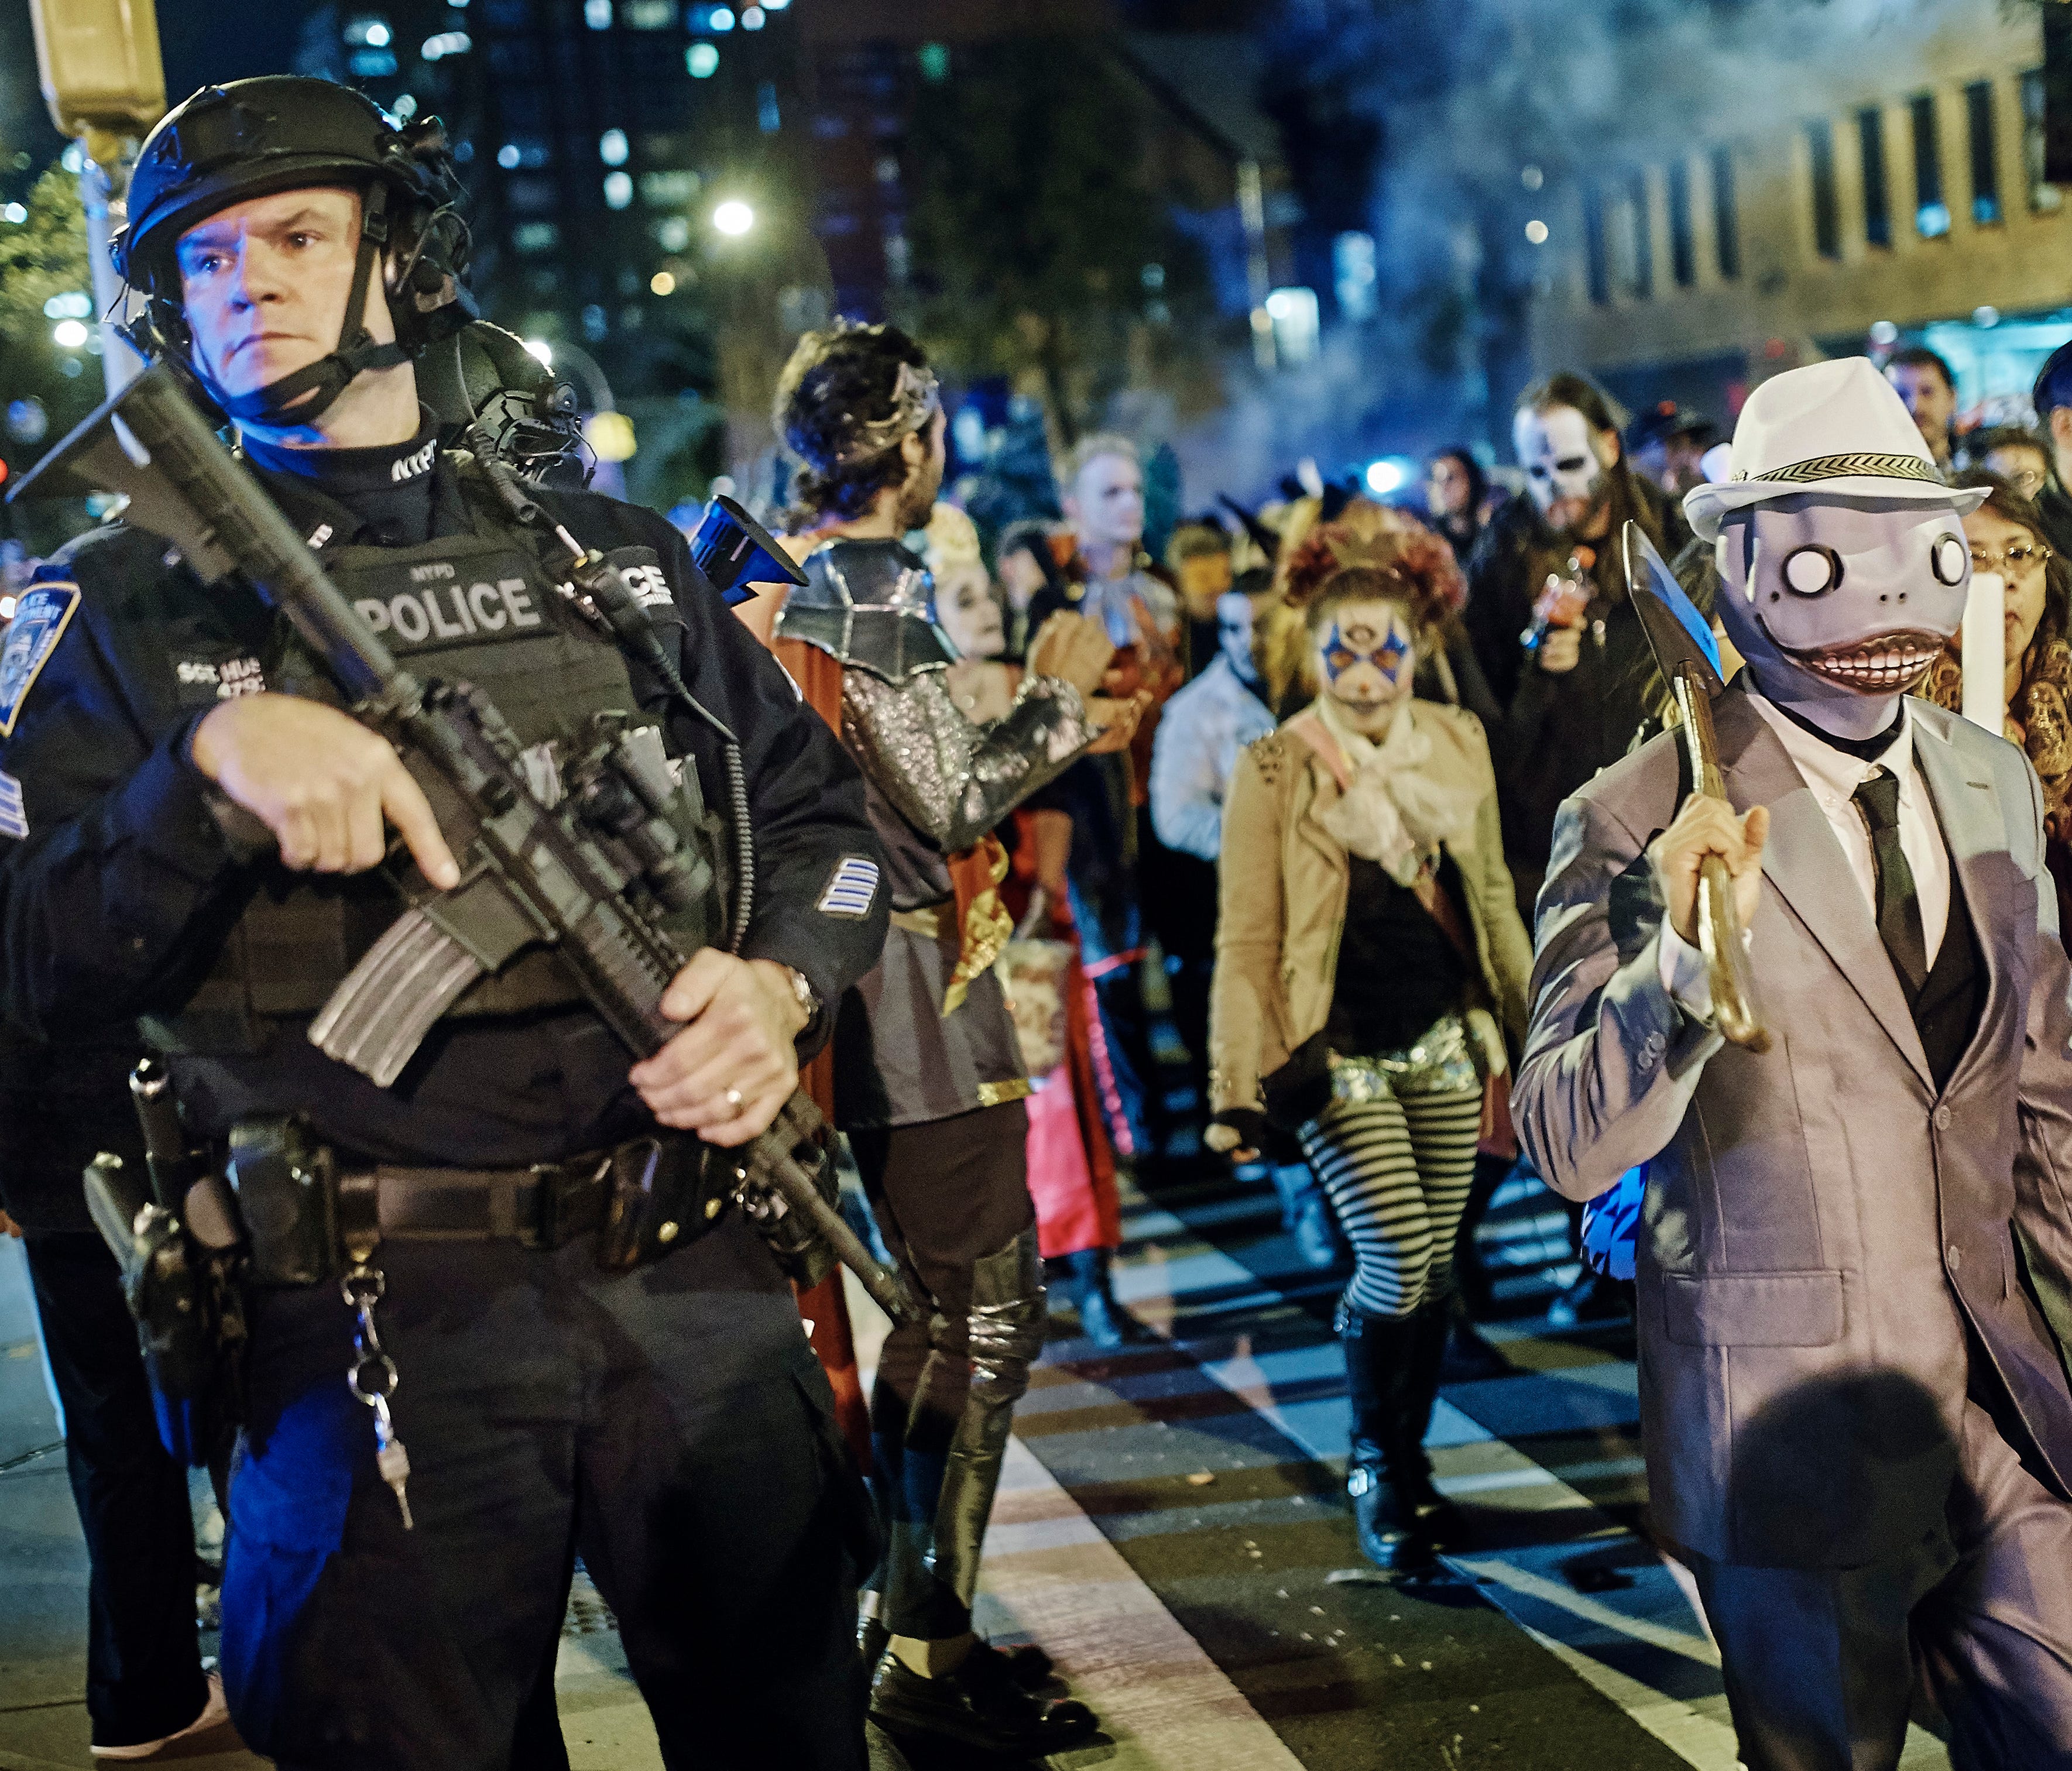 Heavily armed police guard as revelers march during the Greenwich Village Halloween Parade, Tuesday, Oct. 31, 2017, in New York.